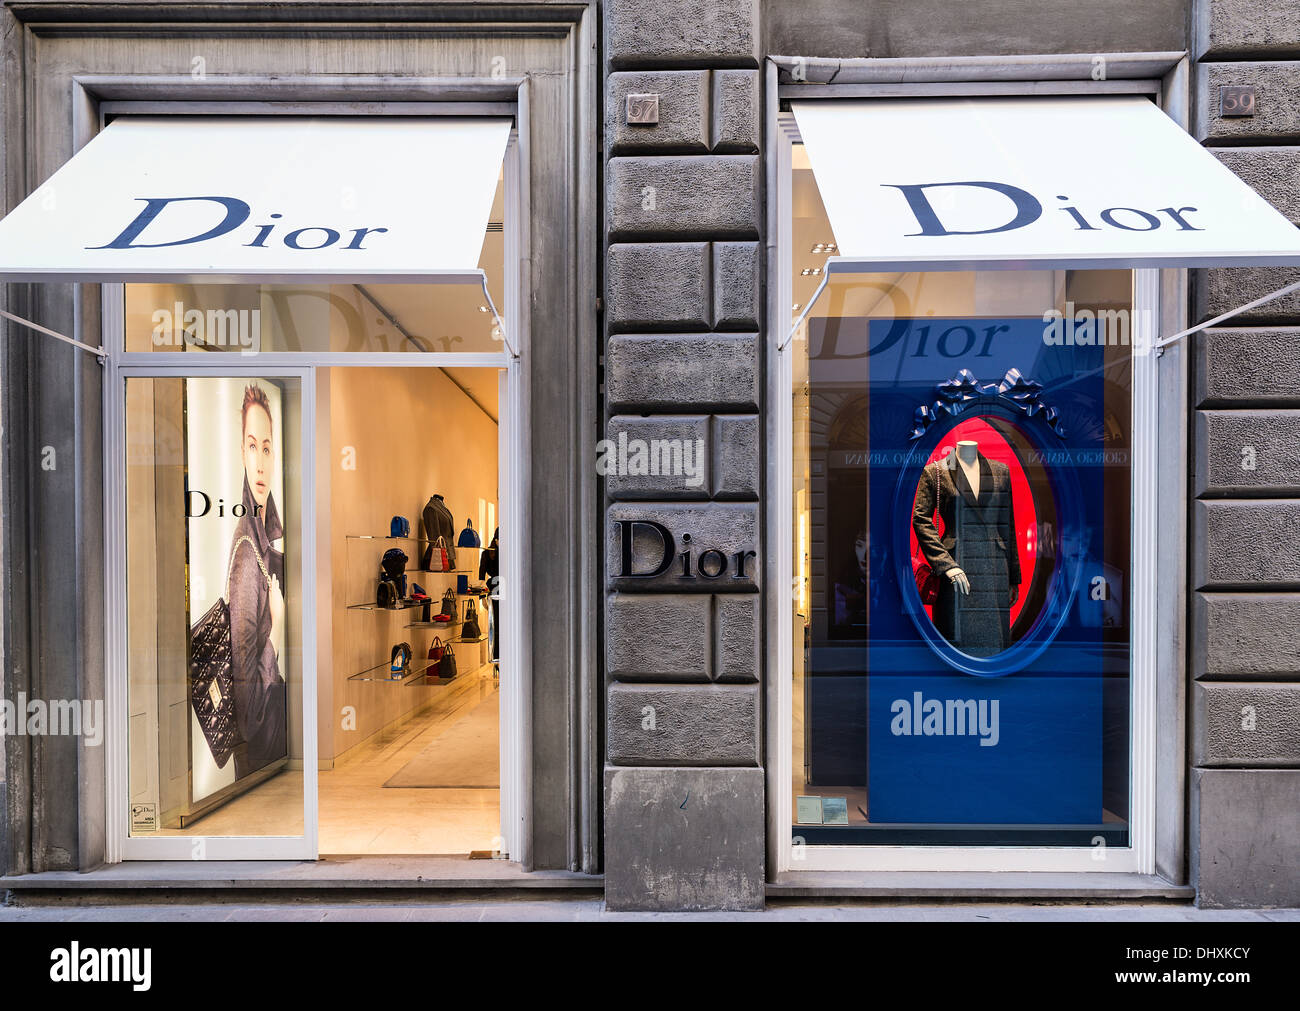 Dior retail clothing store, Florence, Italy Stock Photo